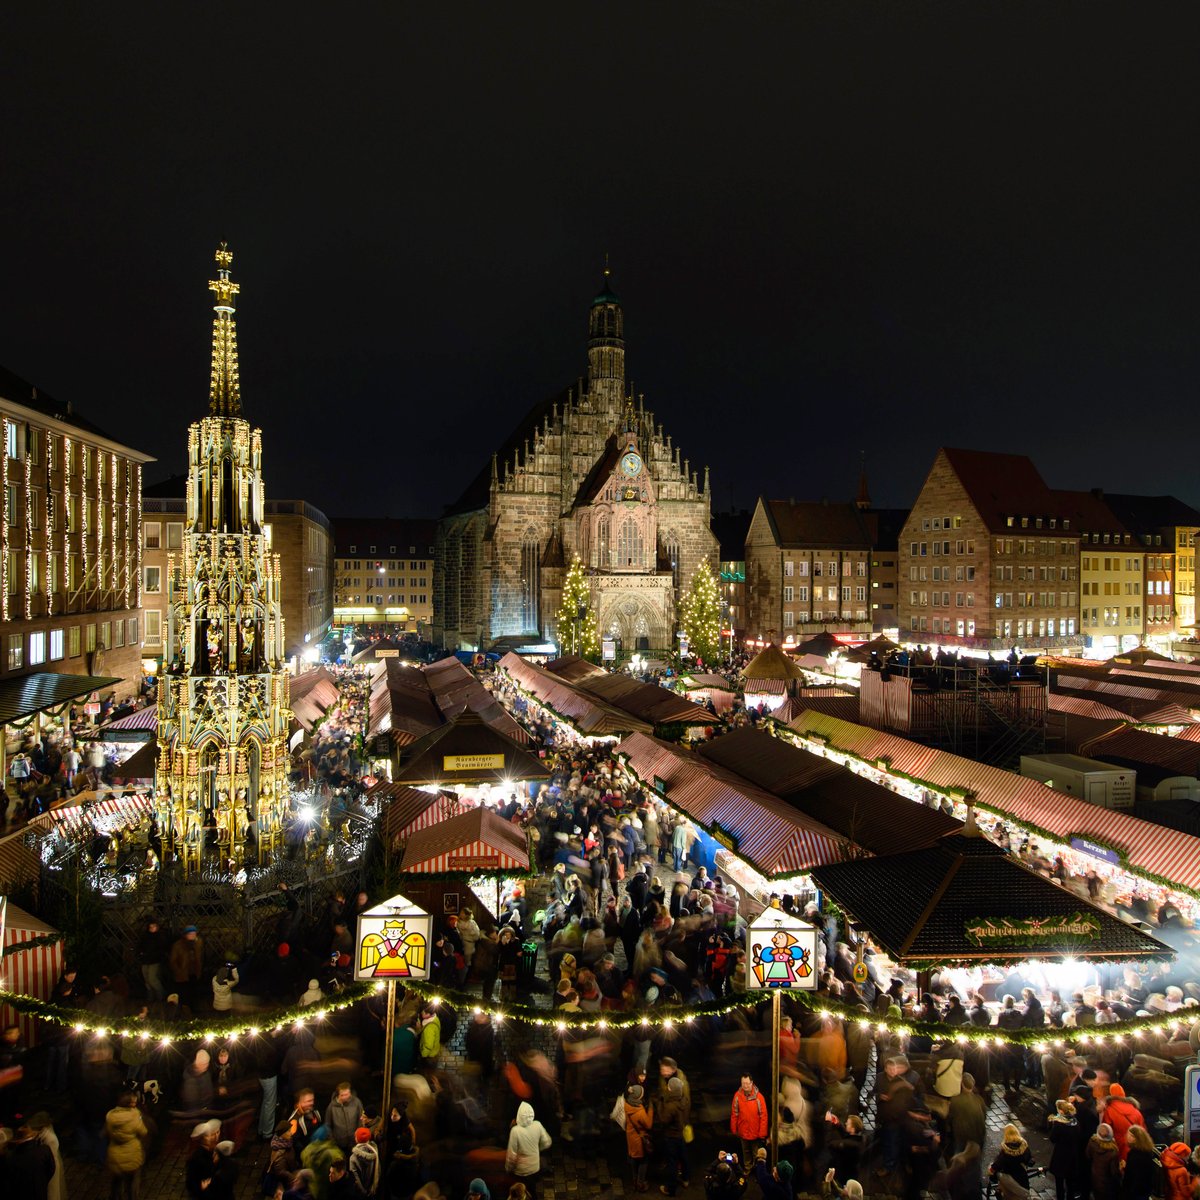  NUREMBERG CHRISTMAS MARKET All You Need To Know BEFORE You Go